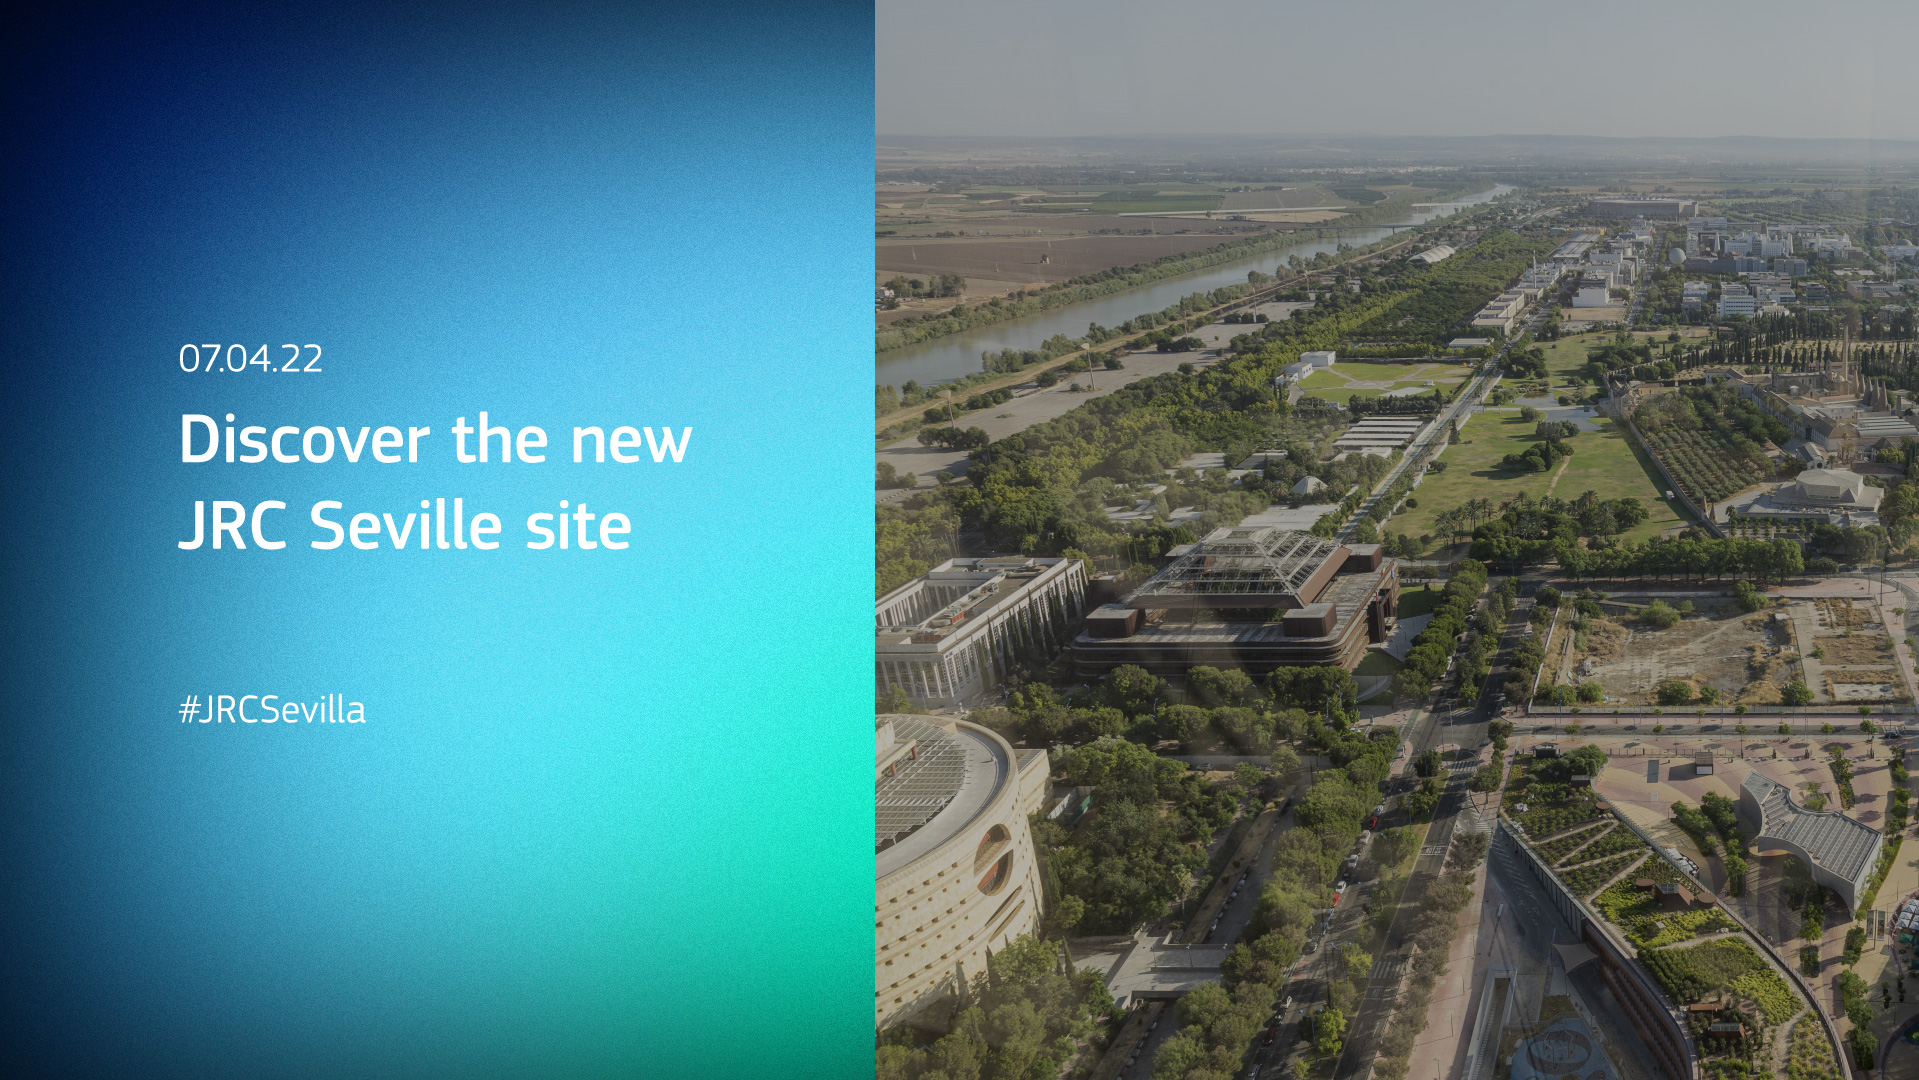 Announcement of the New European Bauhaus inspired future JRC site in Seville